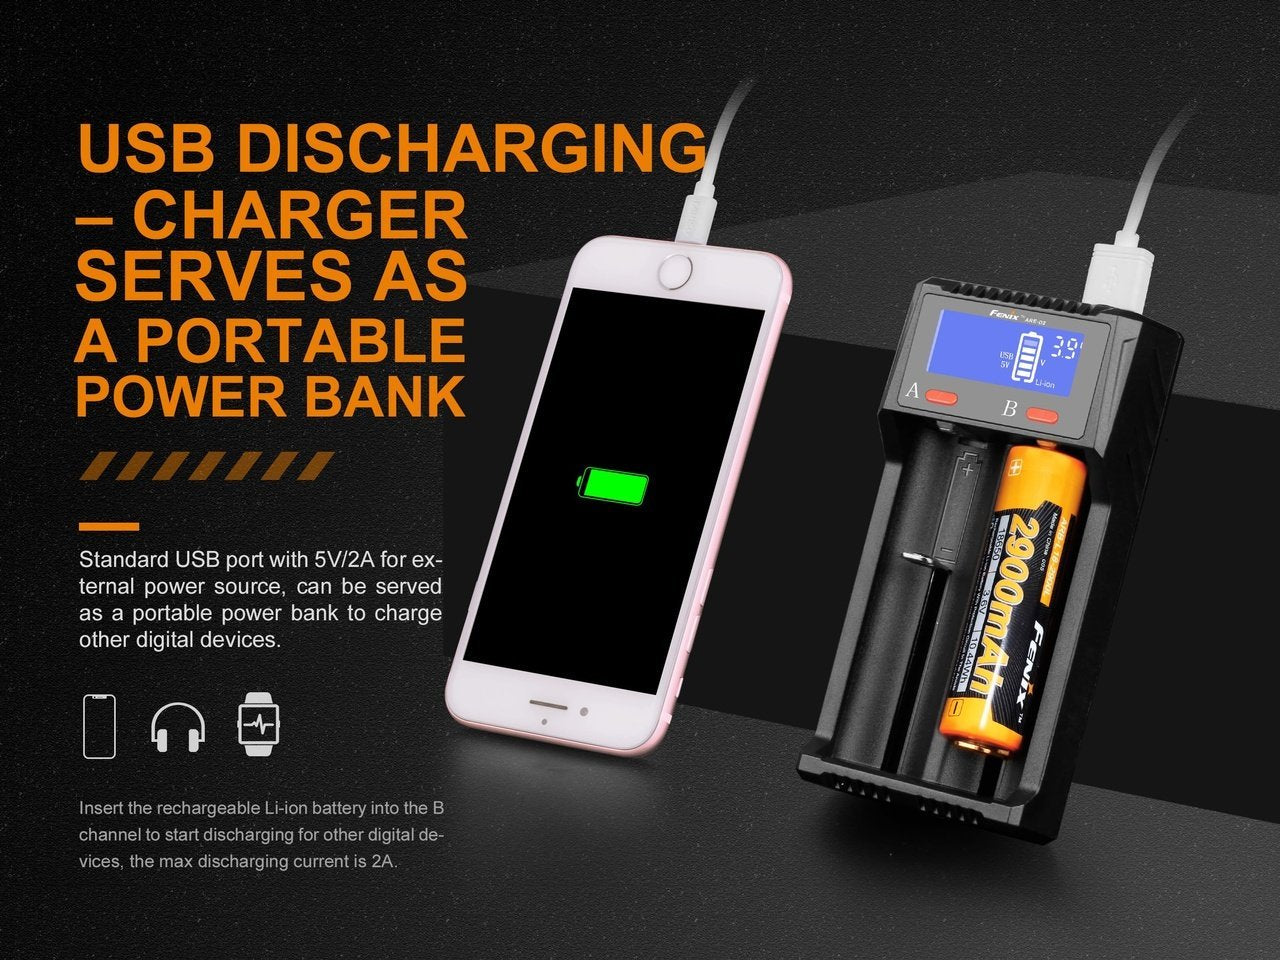 ARE-D2 discharge as a powerbank